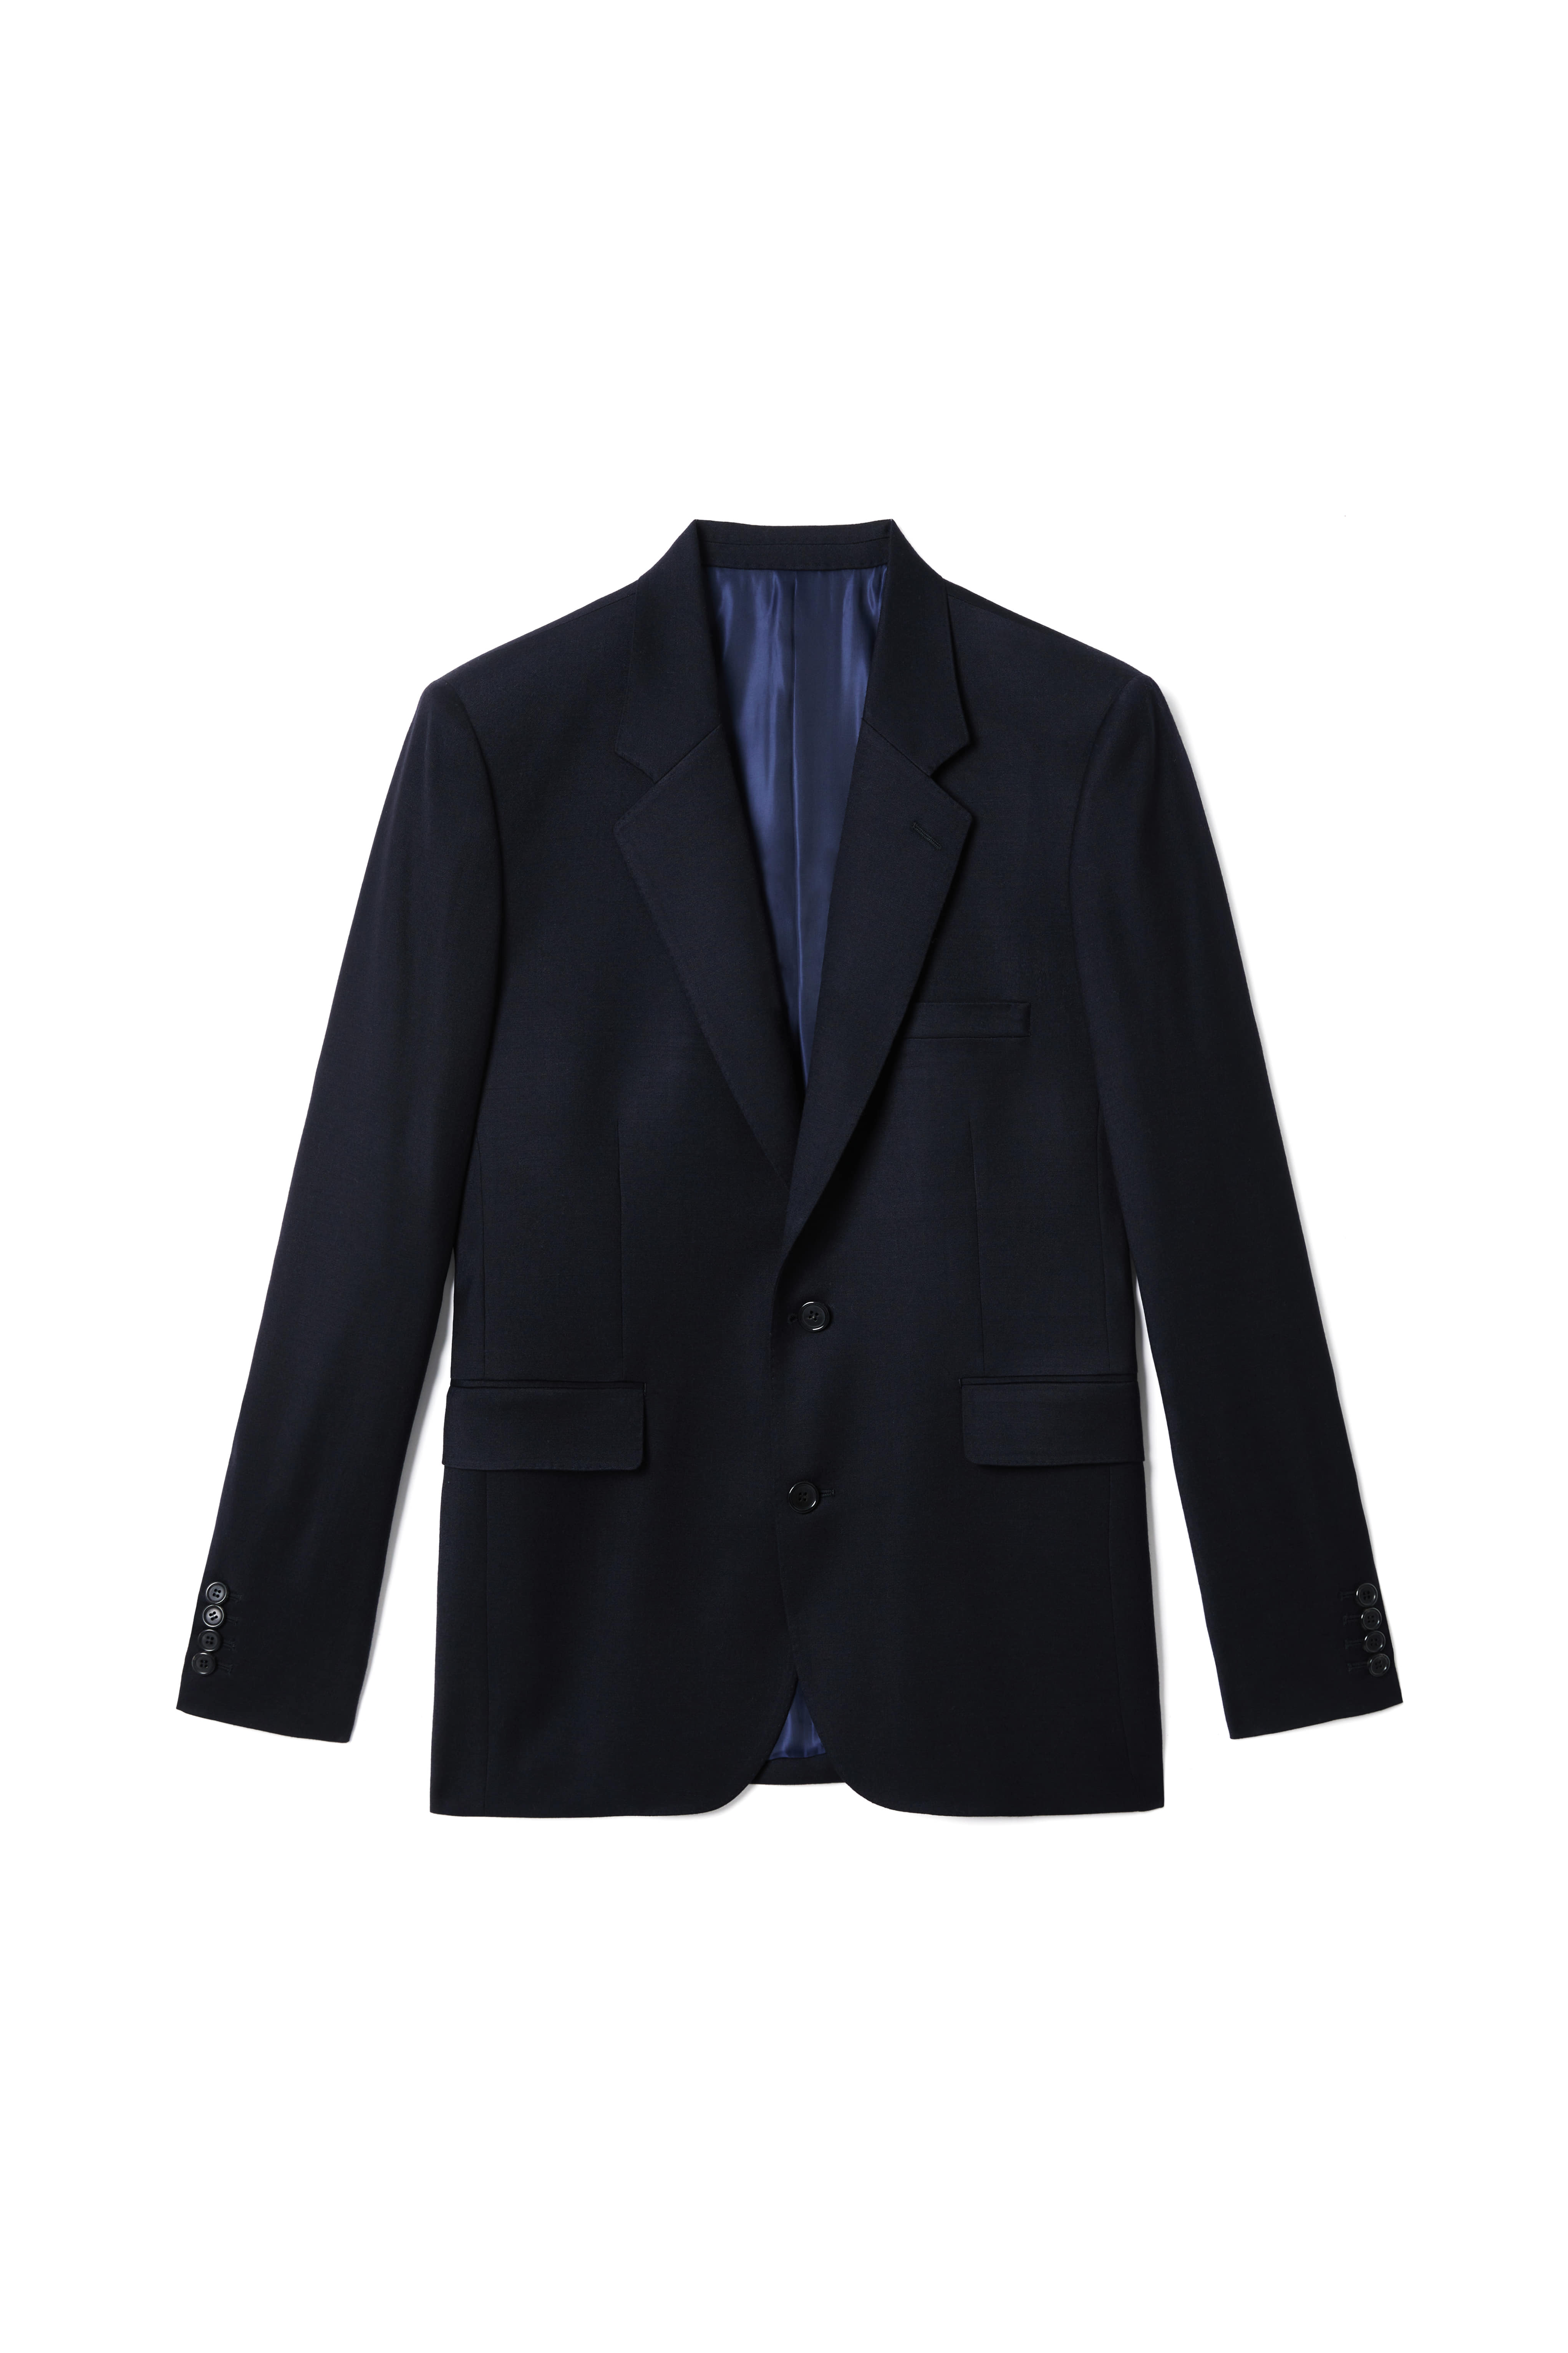 CLASSIC JACKET IN NAVY WOOL